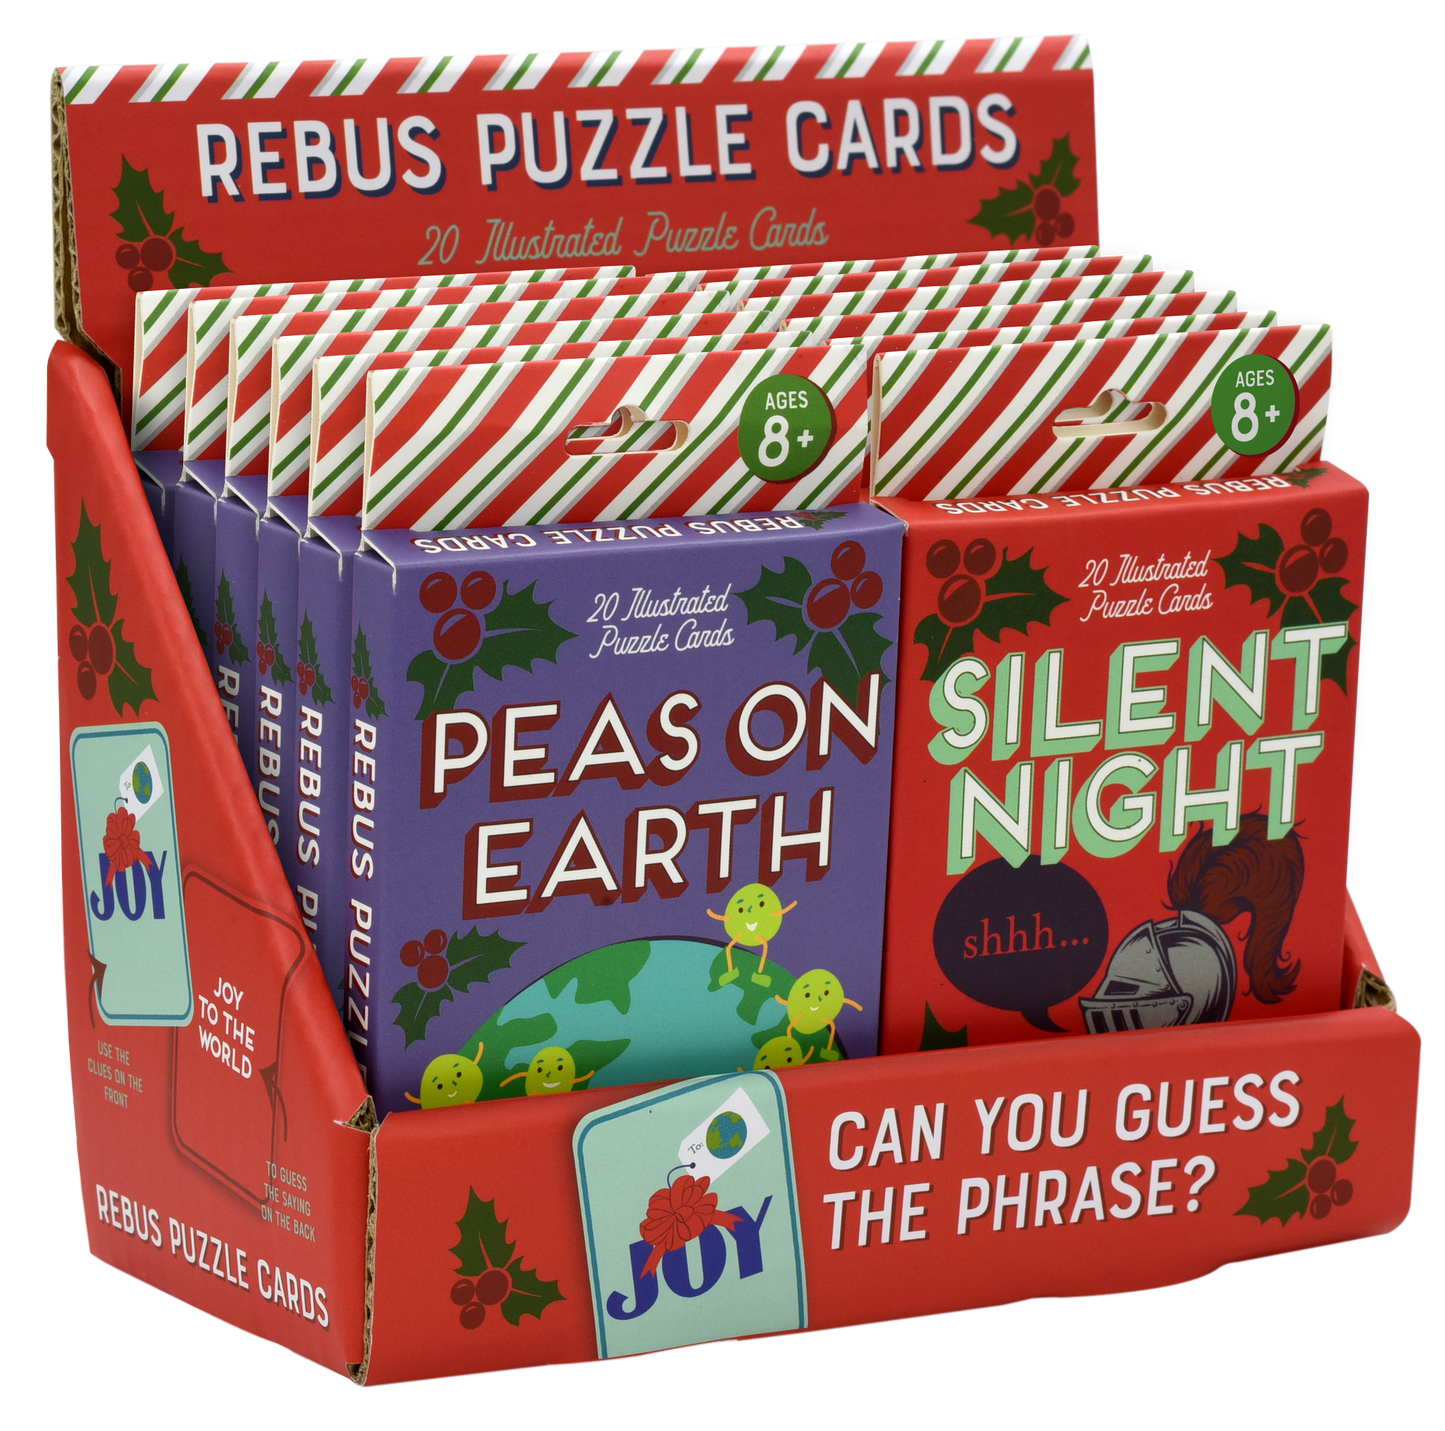 Holiday REBUS Puzzle Cards